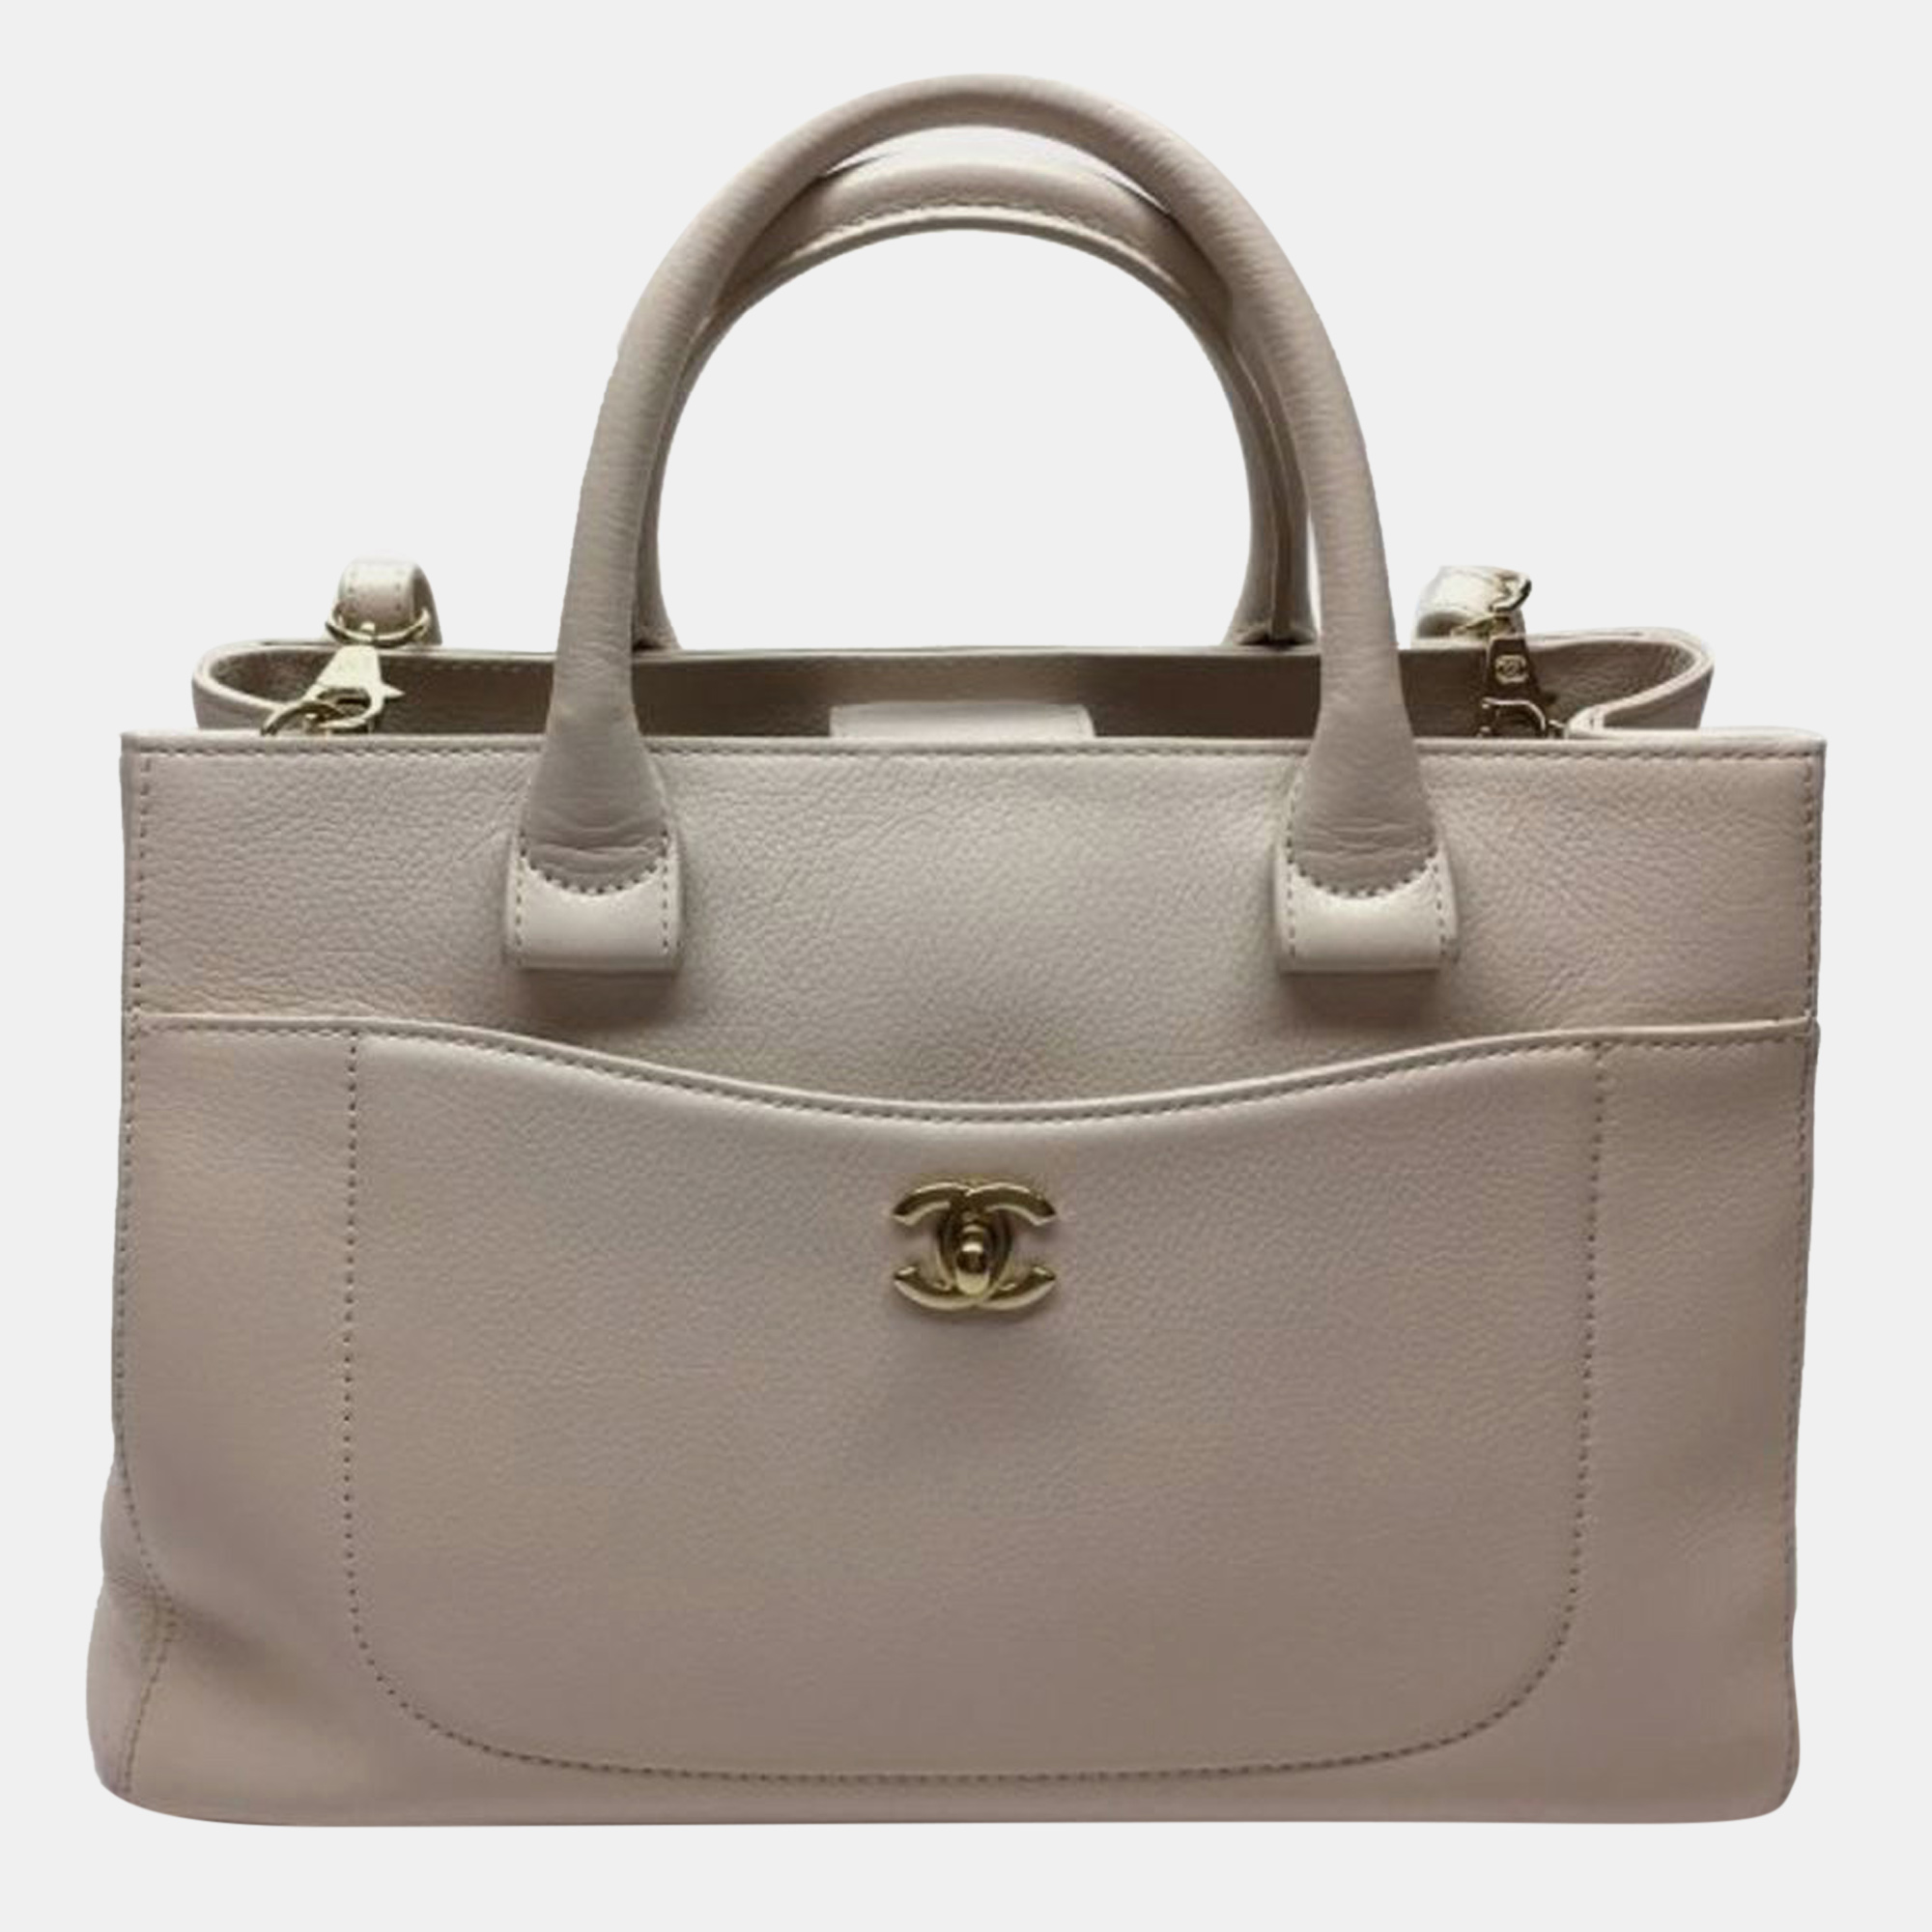 Chanel beige grained calfskin small neo executive tote